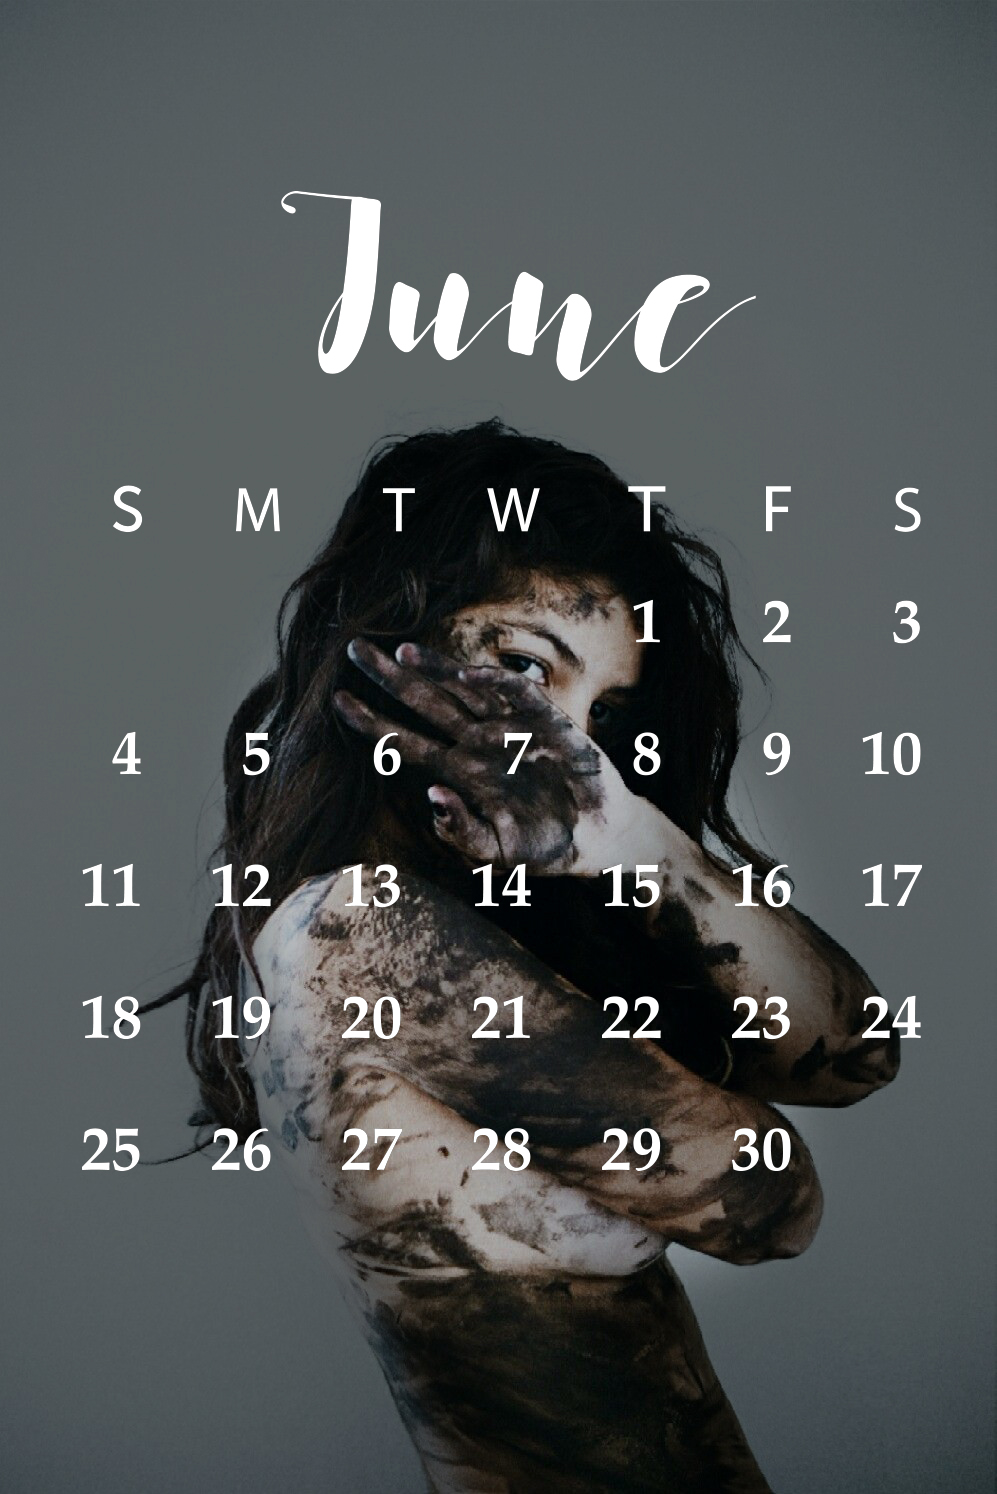 Personalized Calendars Made with PicsArt Photo Editor and Collage Maker